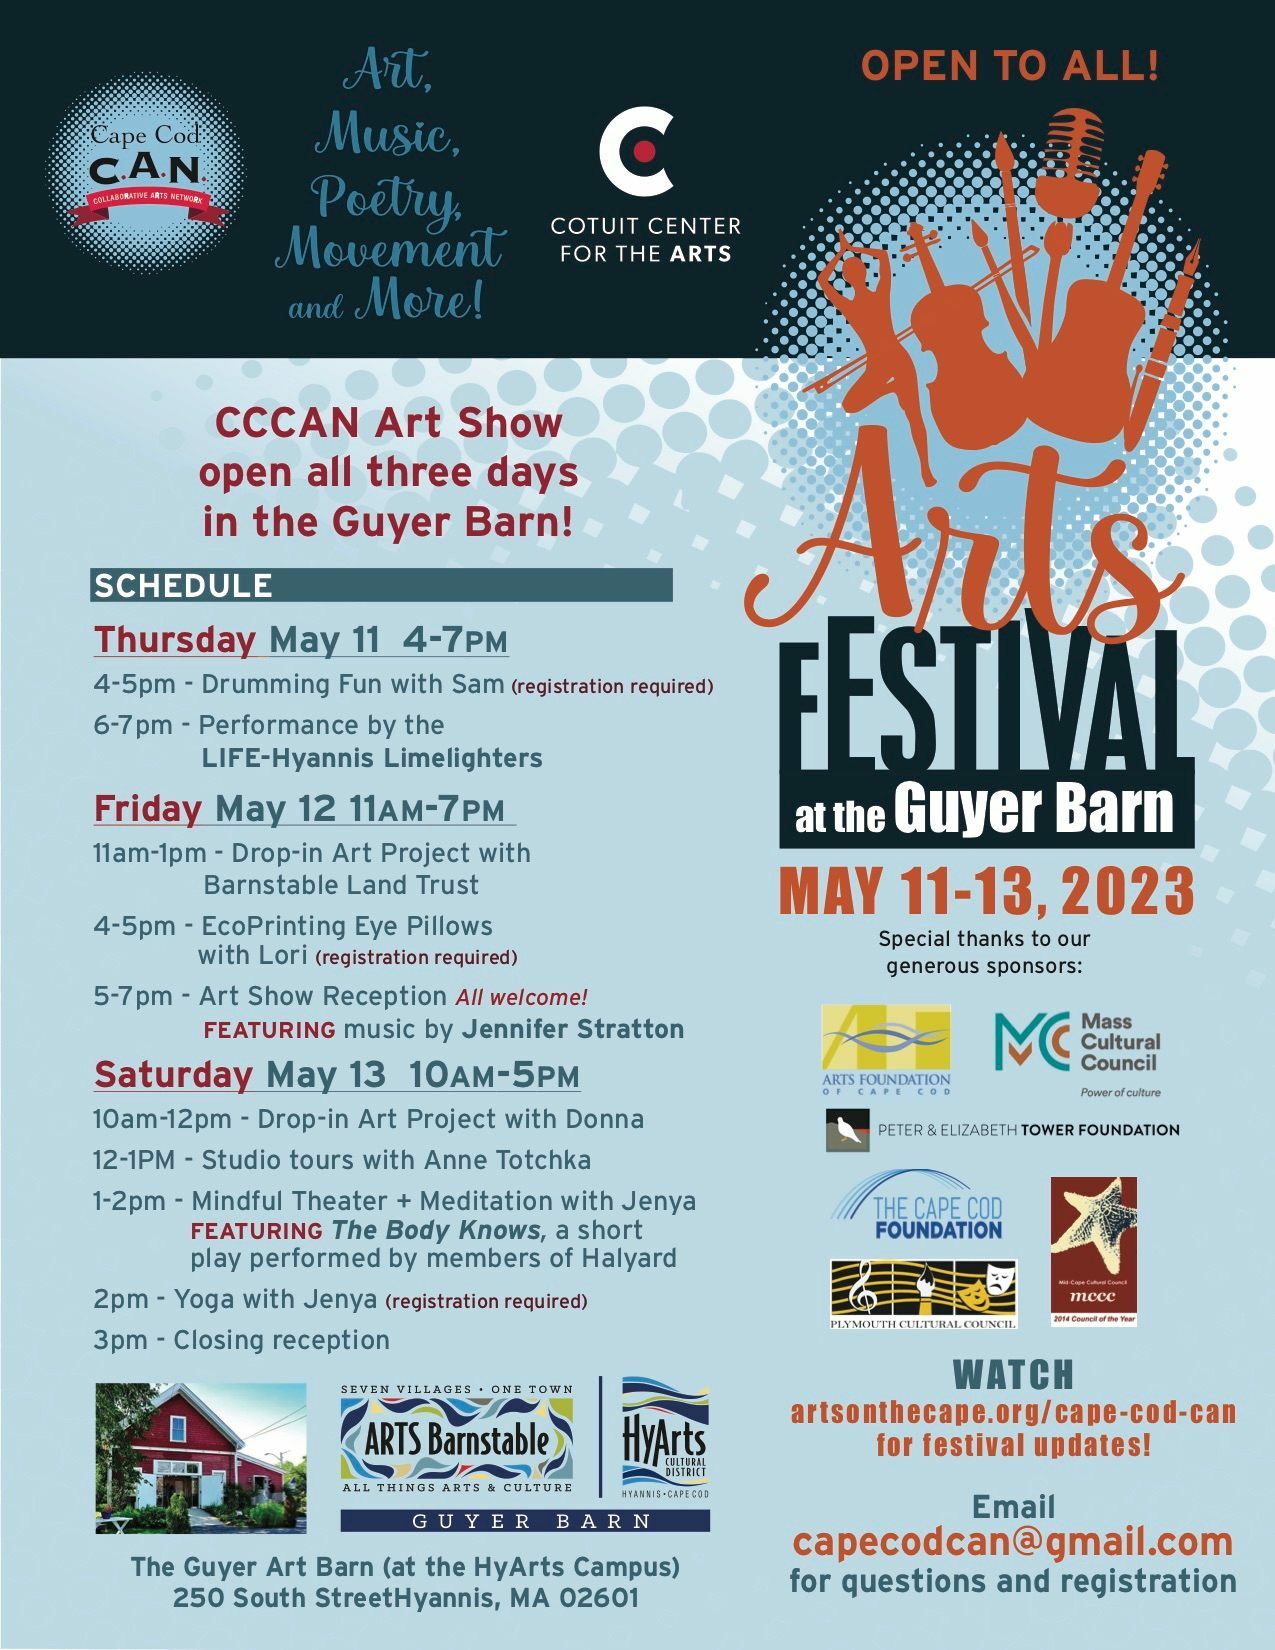 CapeCodCAN Cotuit Center for the Arts